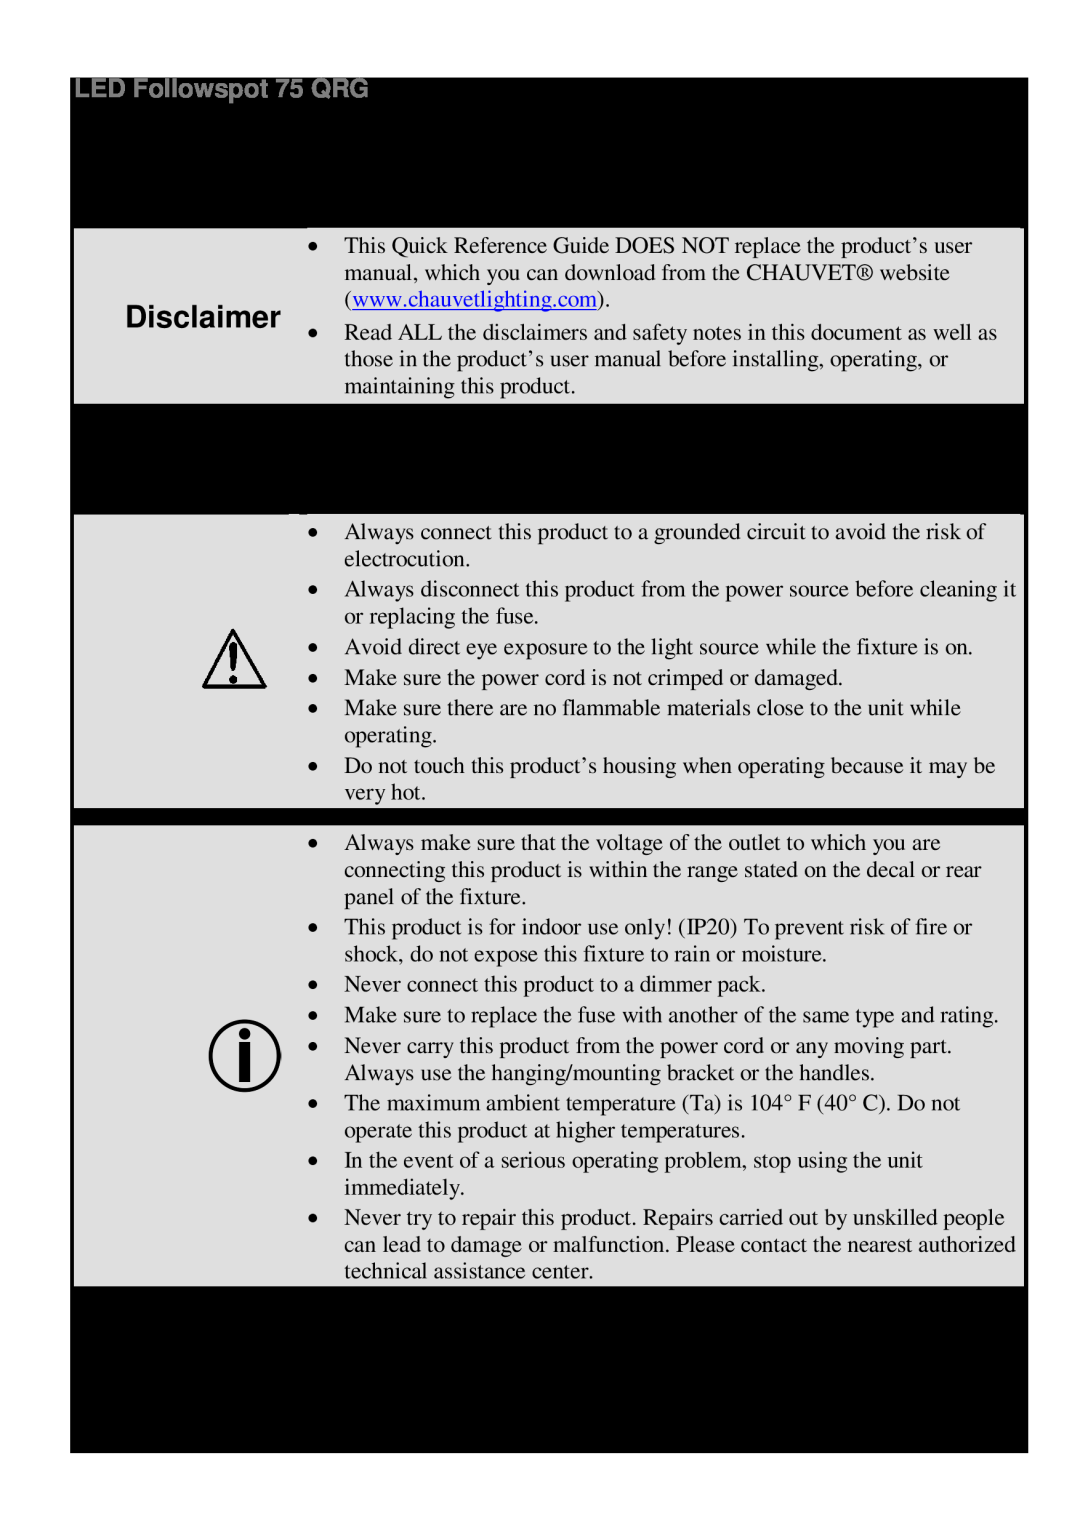 Chauvet manual About this Guide Disclaimer Safety Notes, What is, Included, LED Followspot 75 QRG 